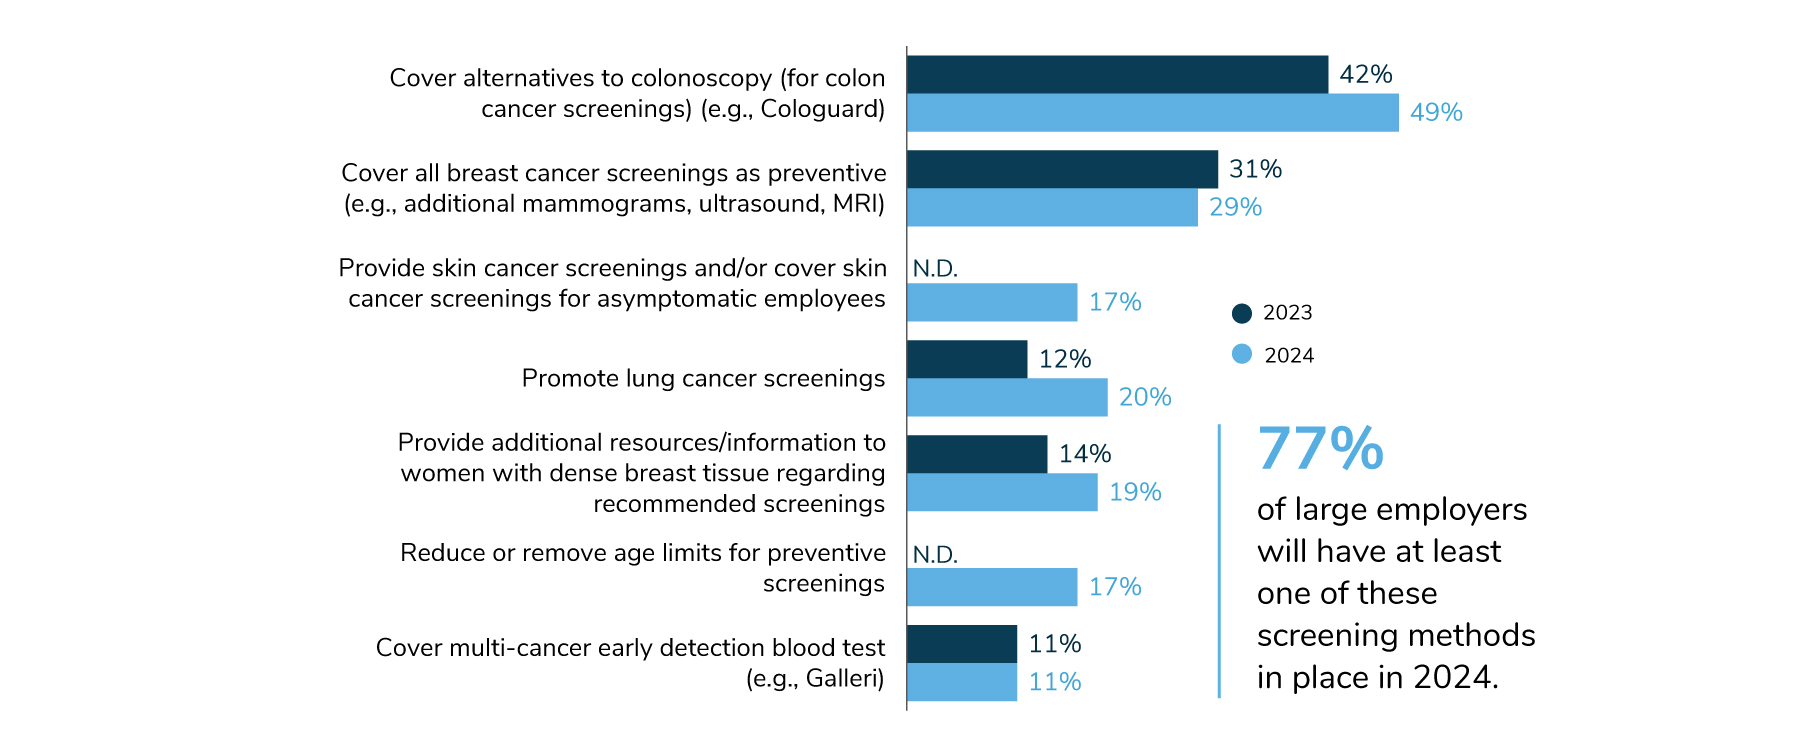 49% of employers will cover alternatives to colonoscopies. 29% will cover all breast cancer screenings as preventive. 11% will cover multi-cancer early detection blood tests.